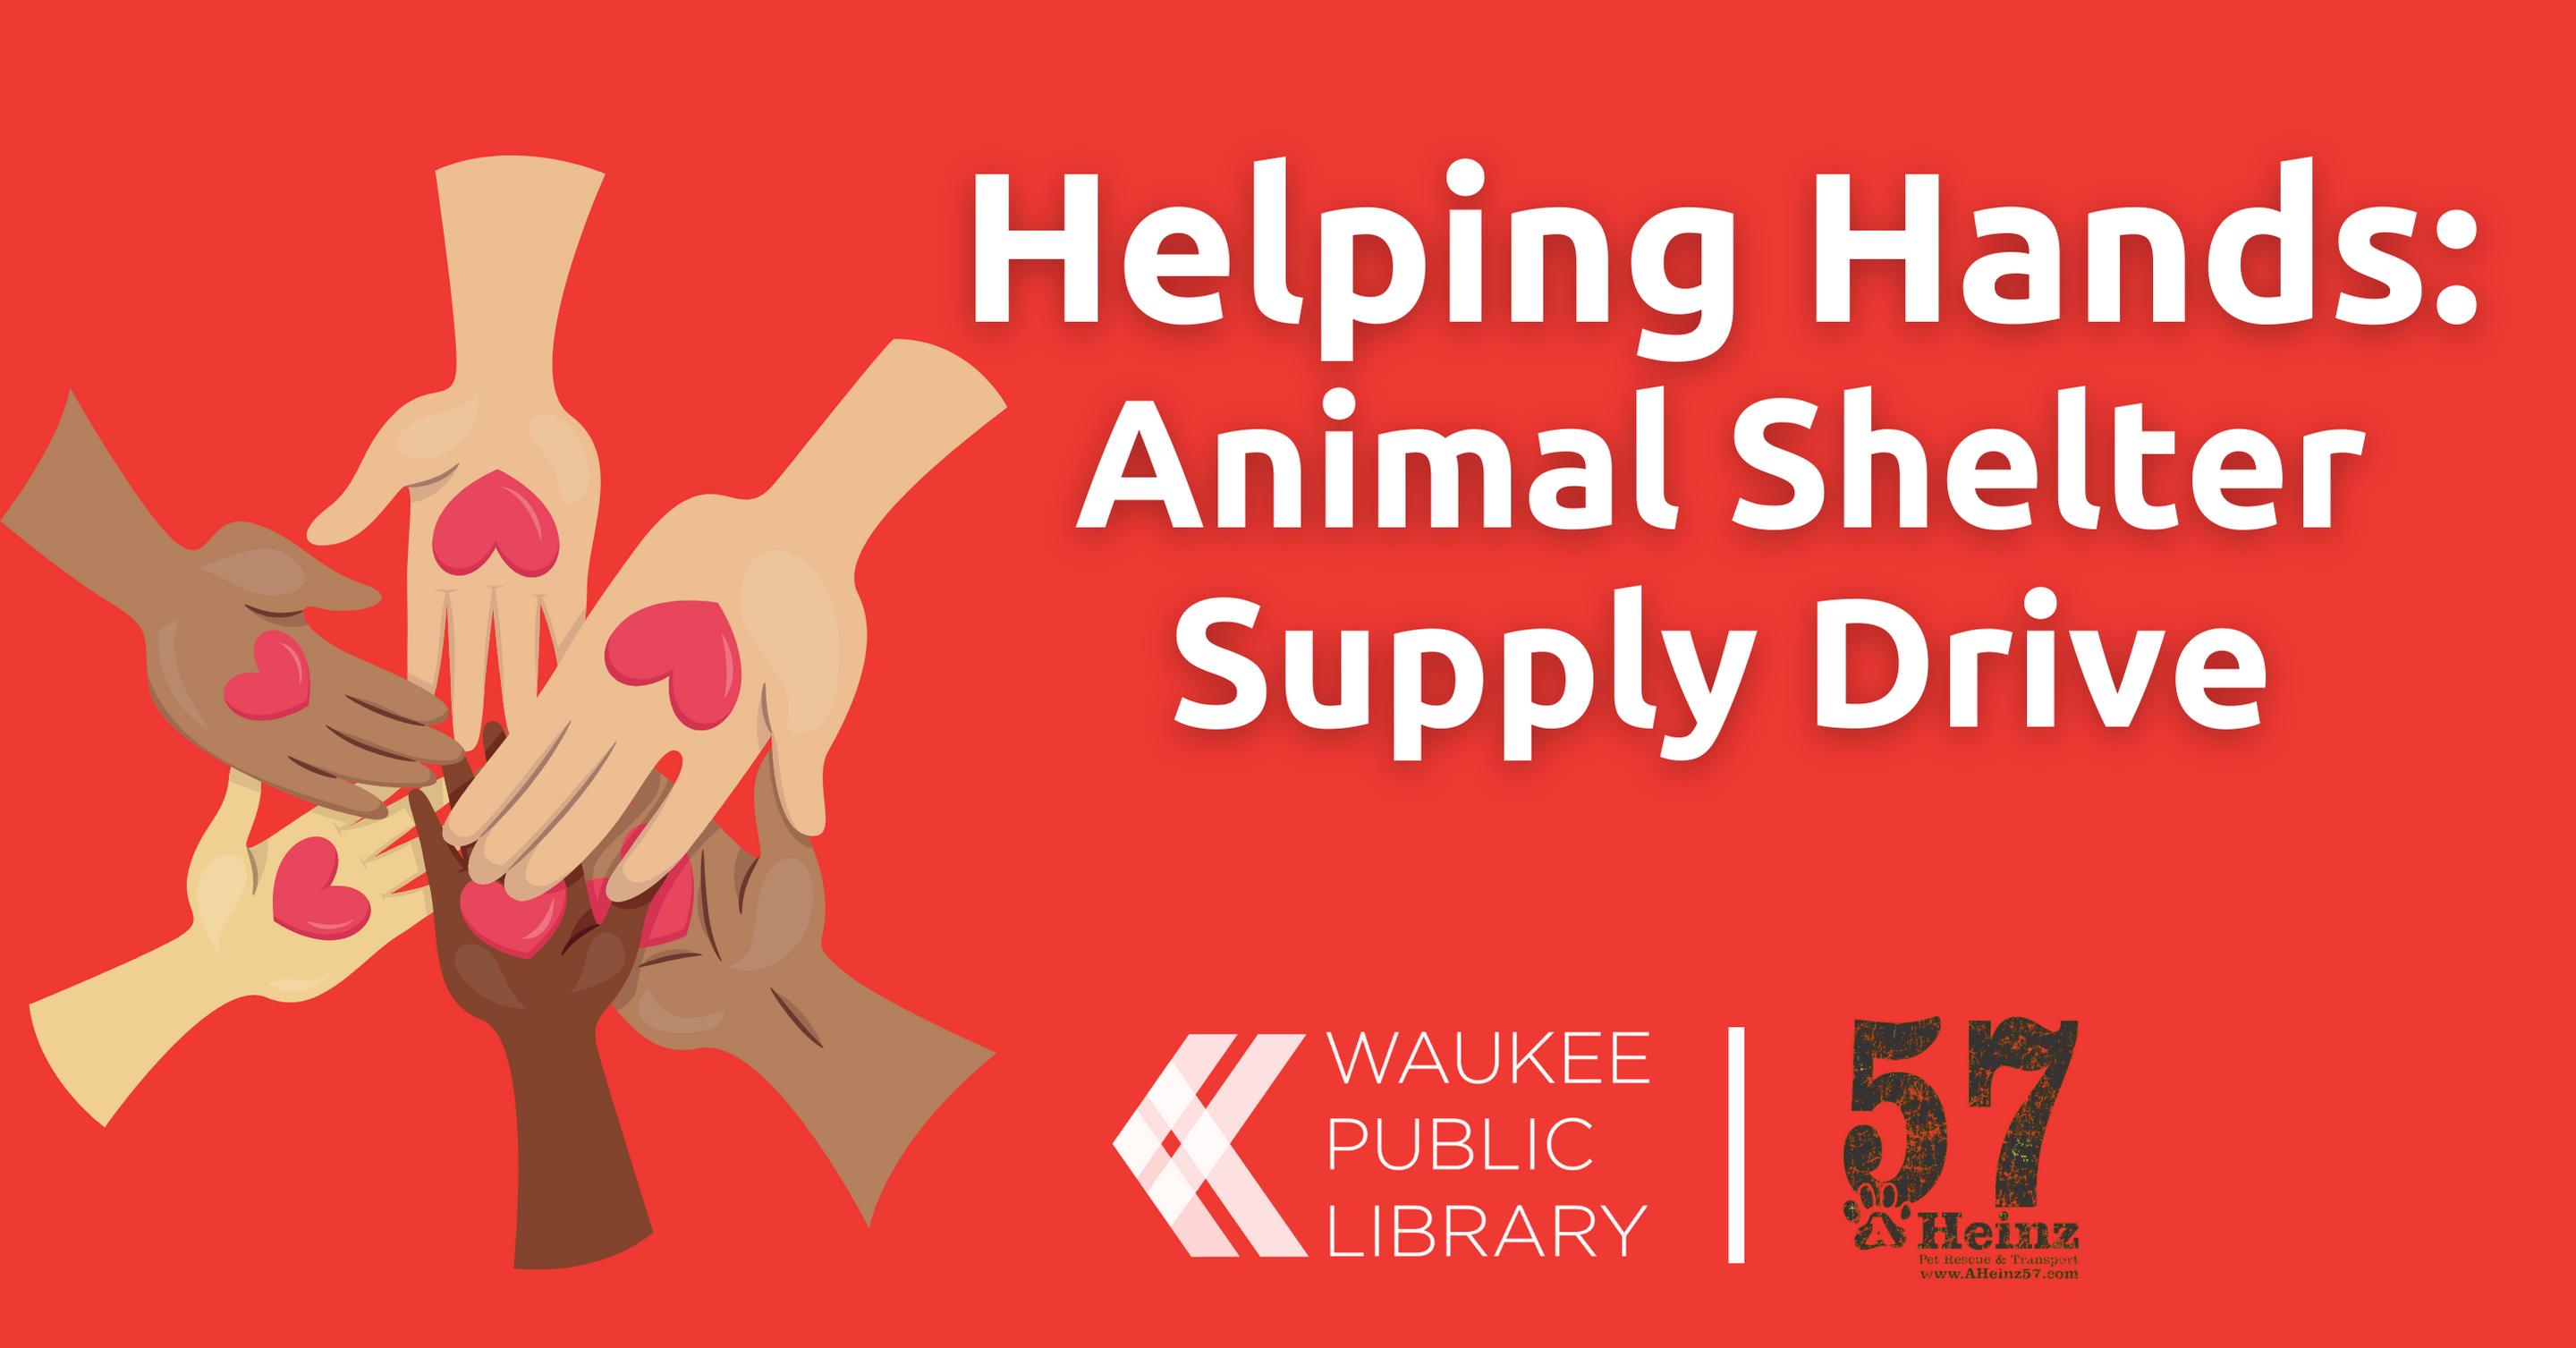 Helping Hands: Animal Shelter Supply Drive